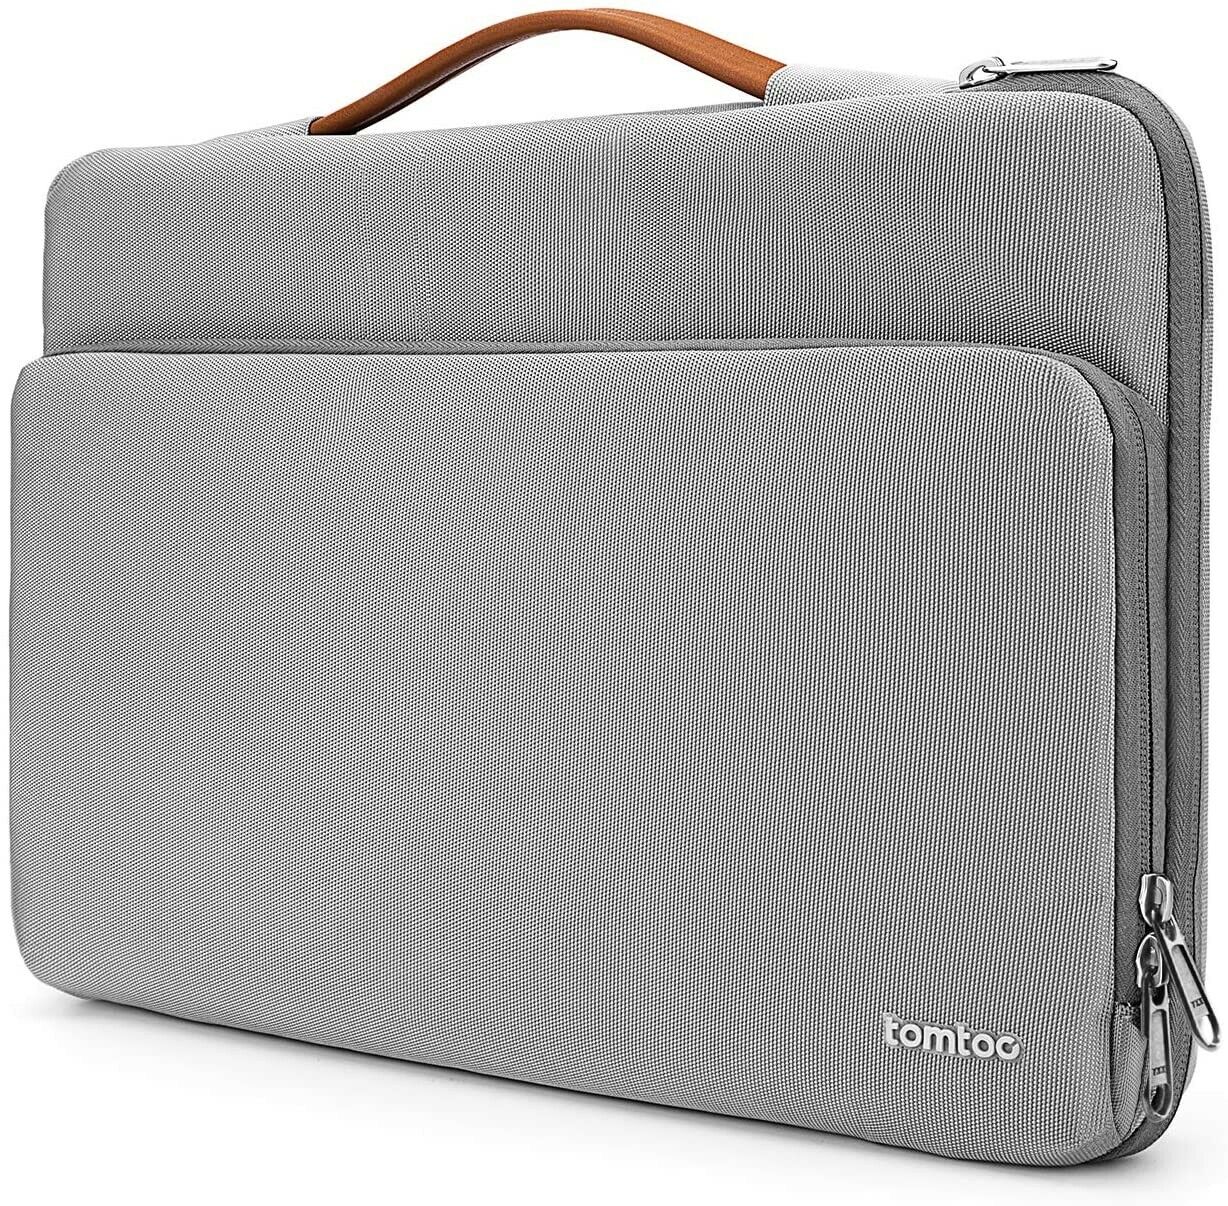 Tomtoc Gray Laptop Carrying Case A14-B02G MacBook Chromebook Water Resistant NEW